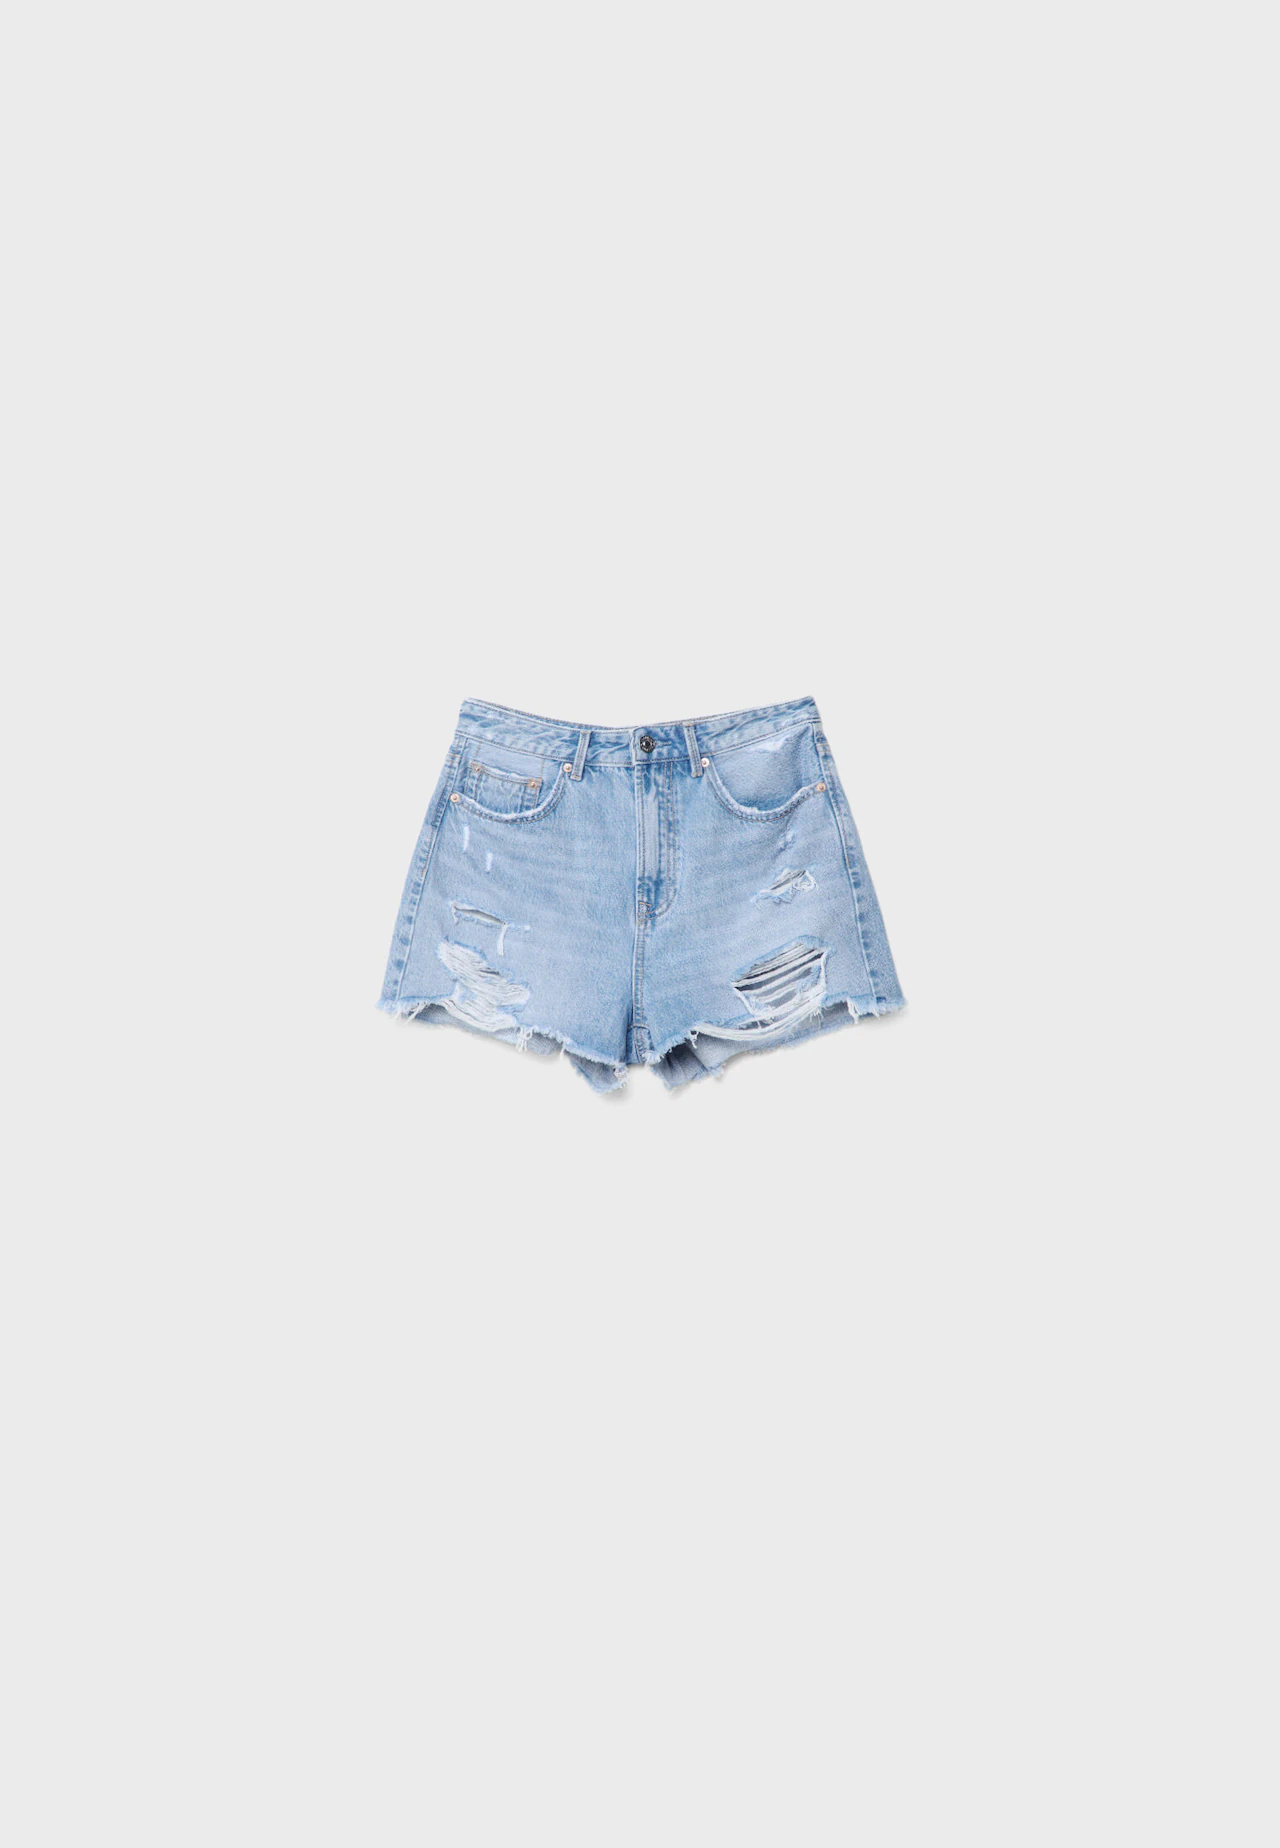 Ripped Denim Overall Shorts